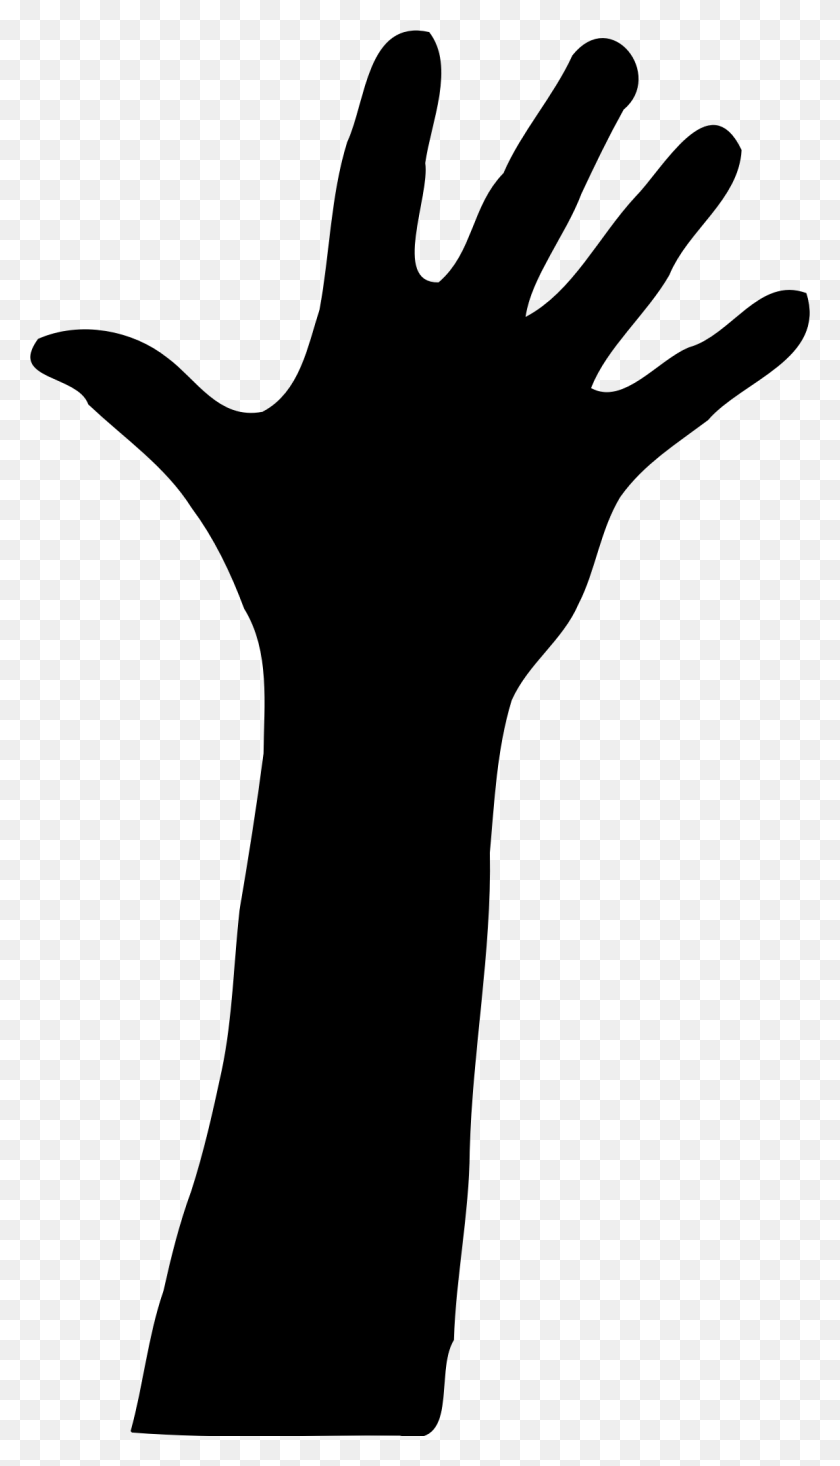 1155x2083 Hand Silhouette Group With Items - Raise Hand Clipart